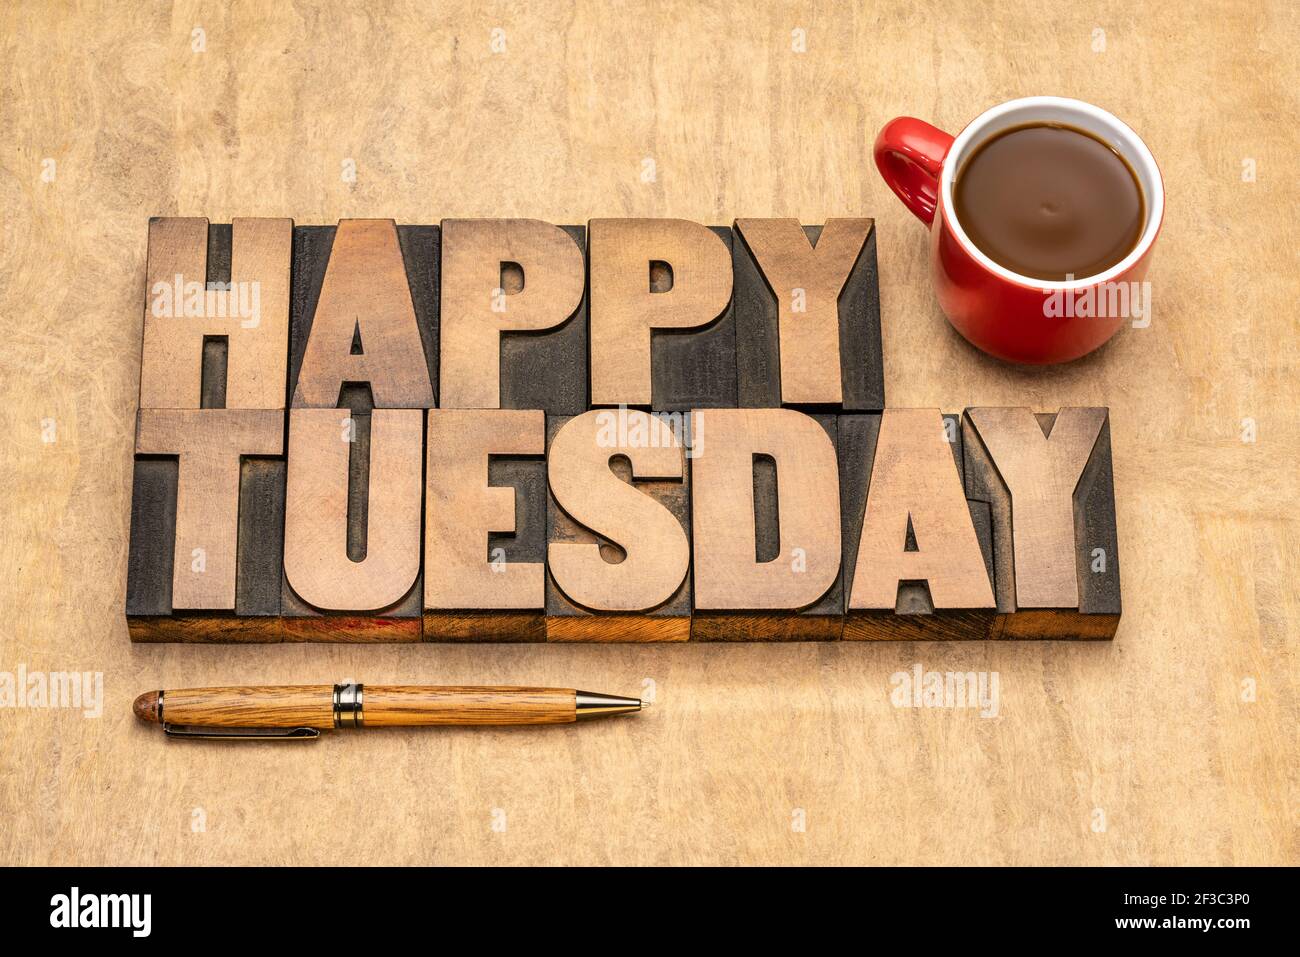 Happy Tuesday word abstract in vintage letterpress wood type against textured handmade paper with a cup of coffee, cheerful greetings Stock Photo